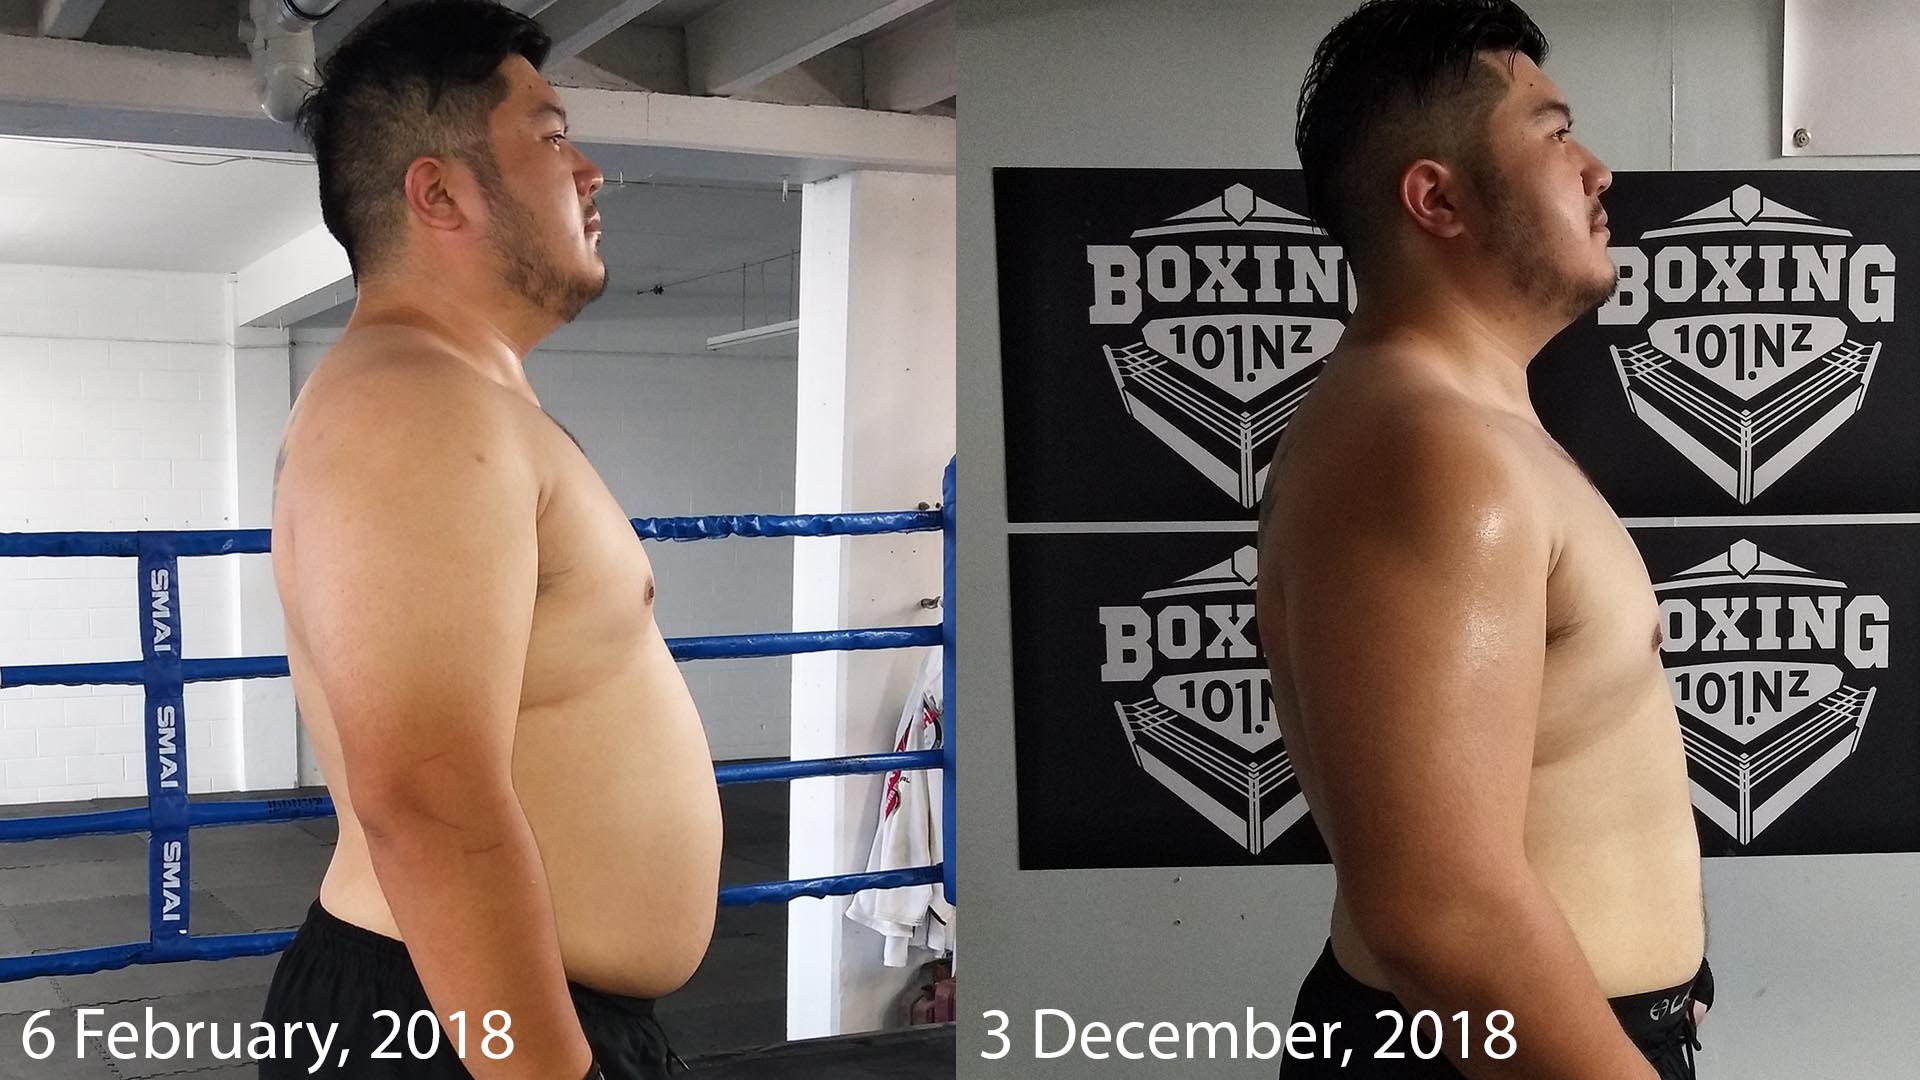 personal training for weight loss with boxing